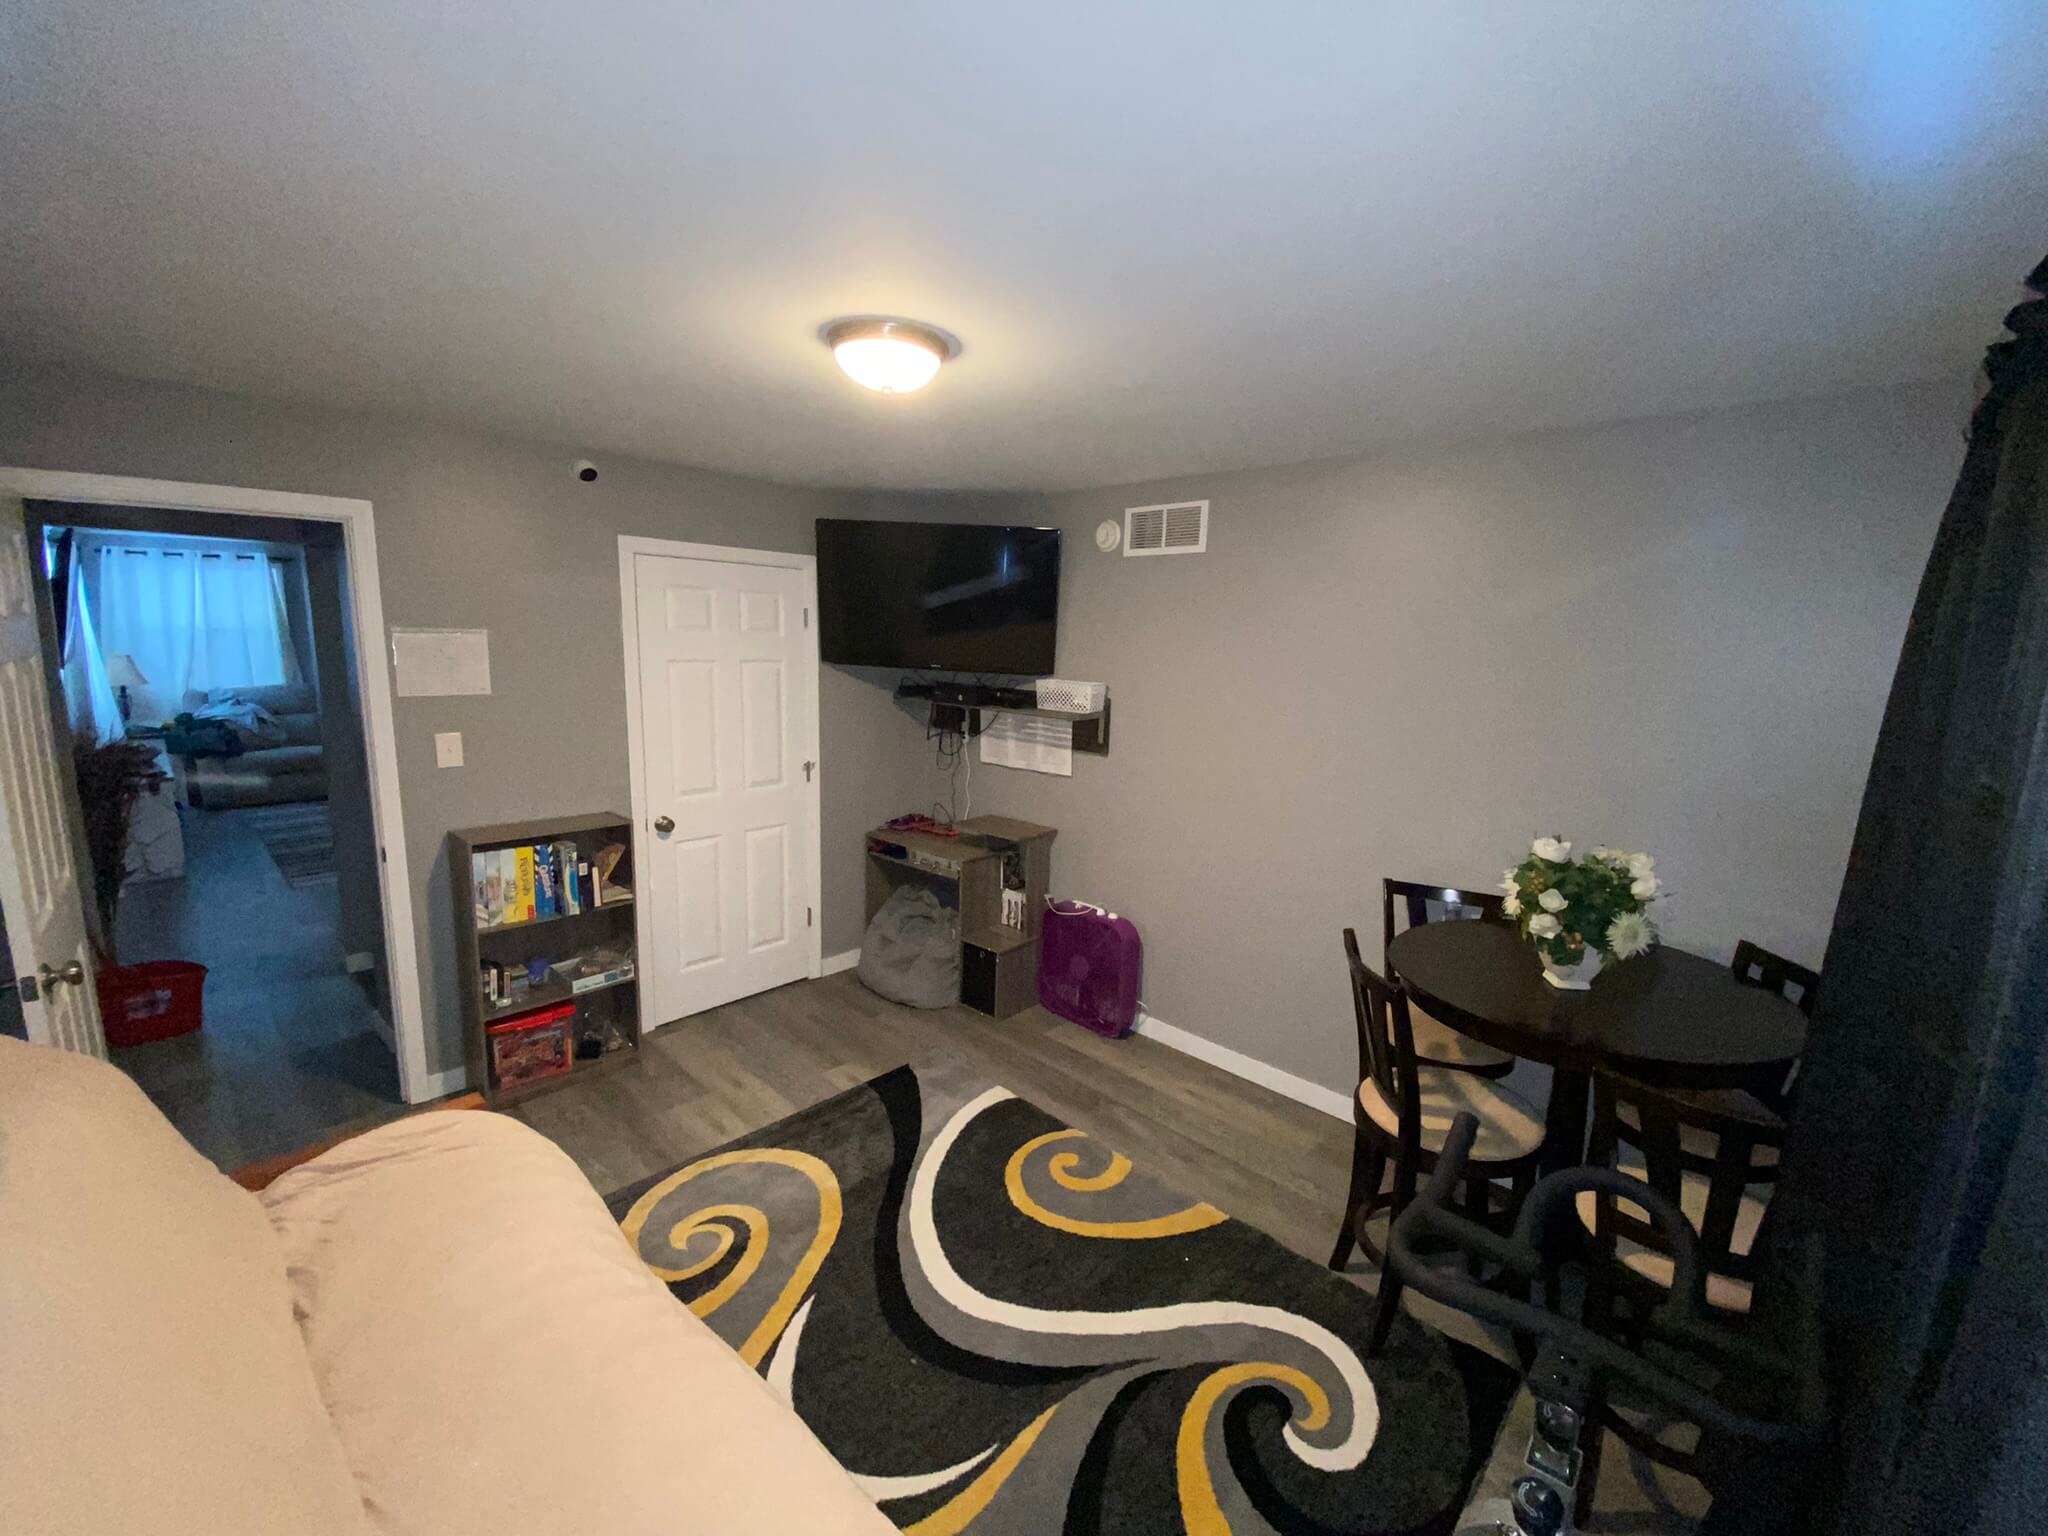 Library and game room space with a futon table and TV